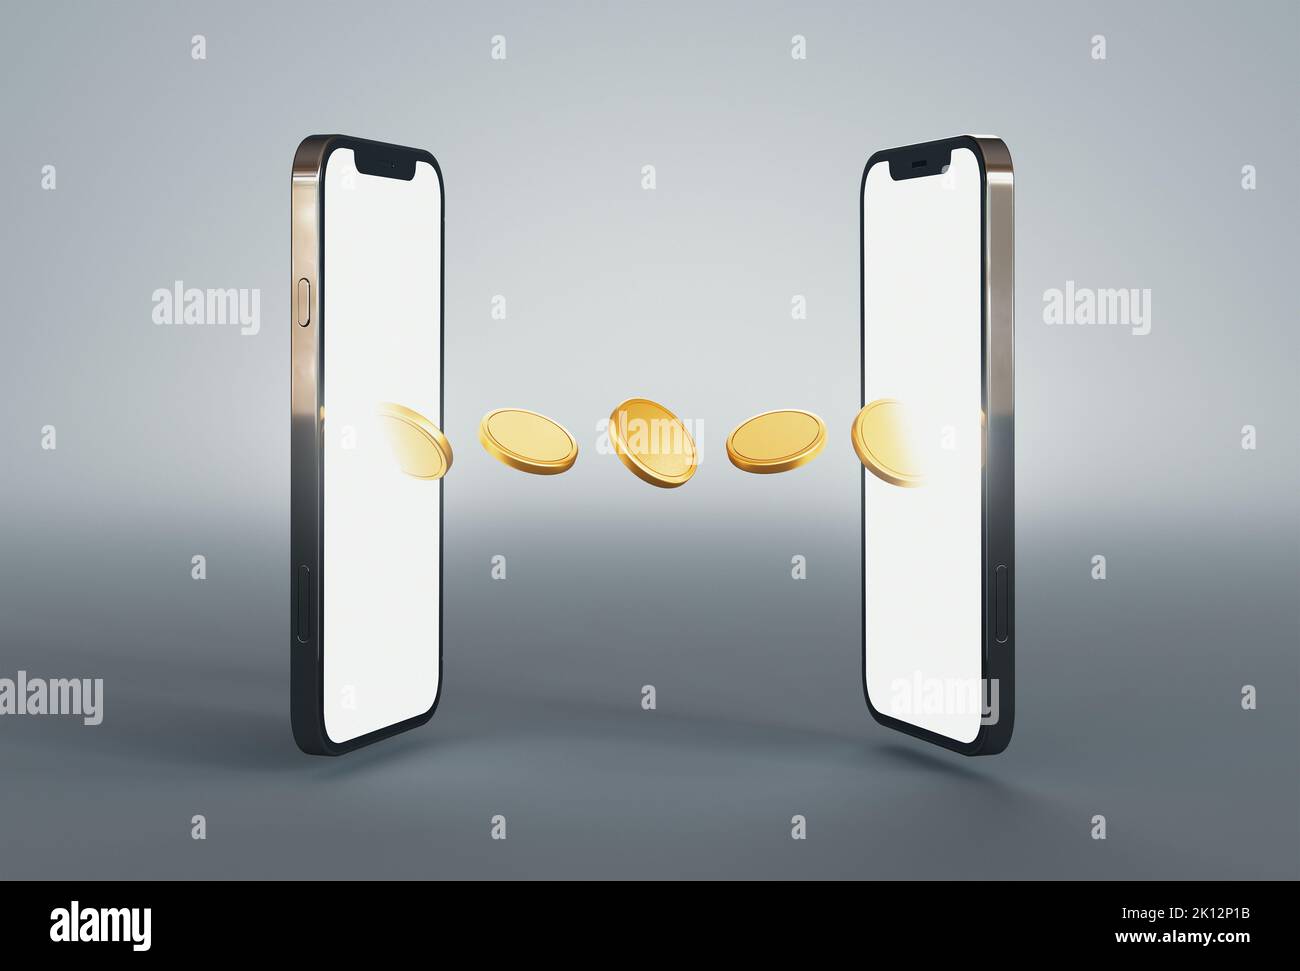 Money transfer on smartphones. Coins moving from one mobile phone to other. Sending and receiving money wirelessly, 3d render. Mobile wallet Stock Photo